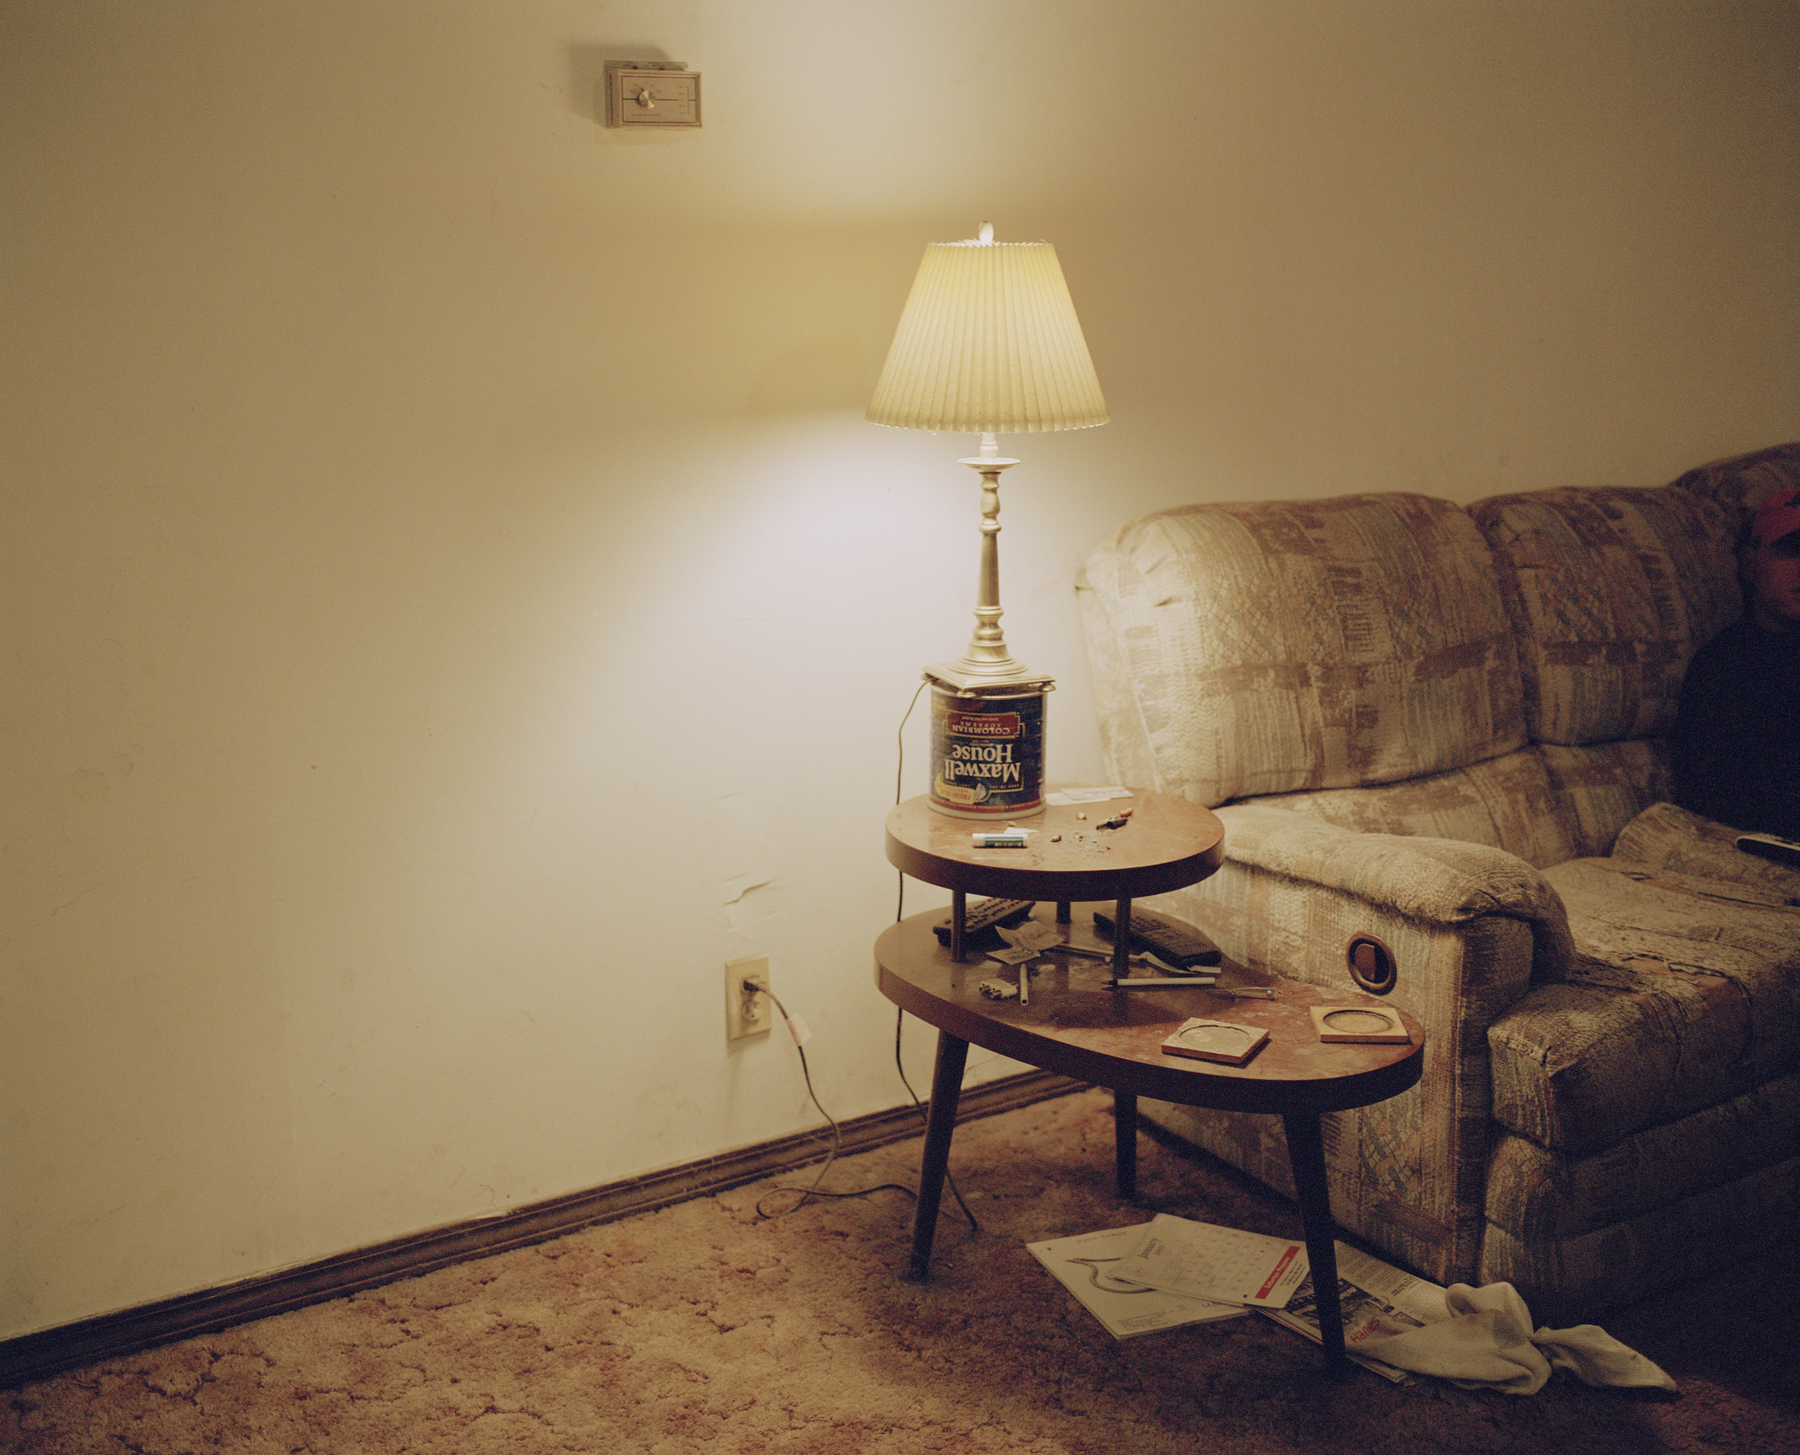    Drug Dealer’s Lamp, Oswego County, NY.   , 2007    Ink jet print, edition of 5 + 2AP    9.5 x 11.75 inches  